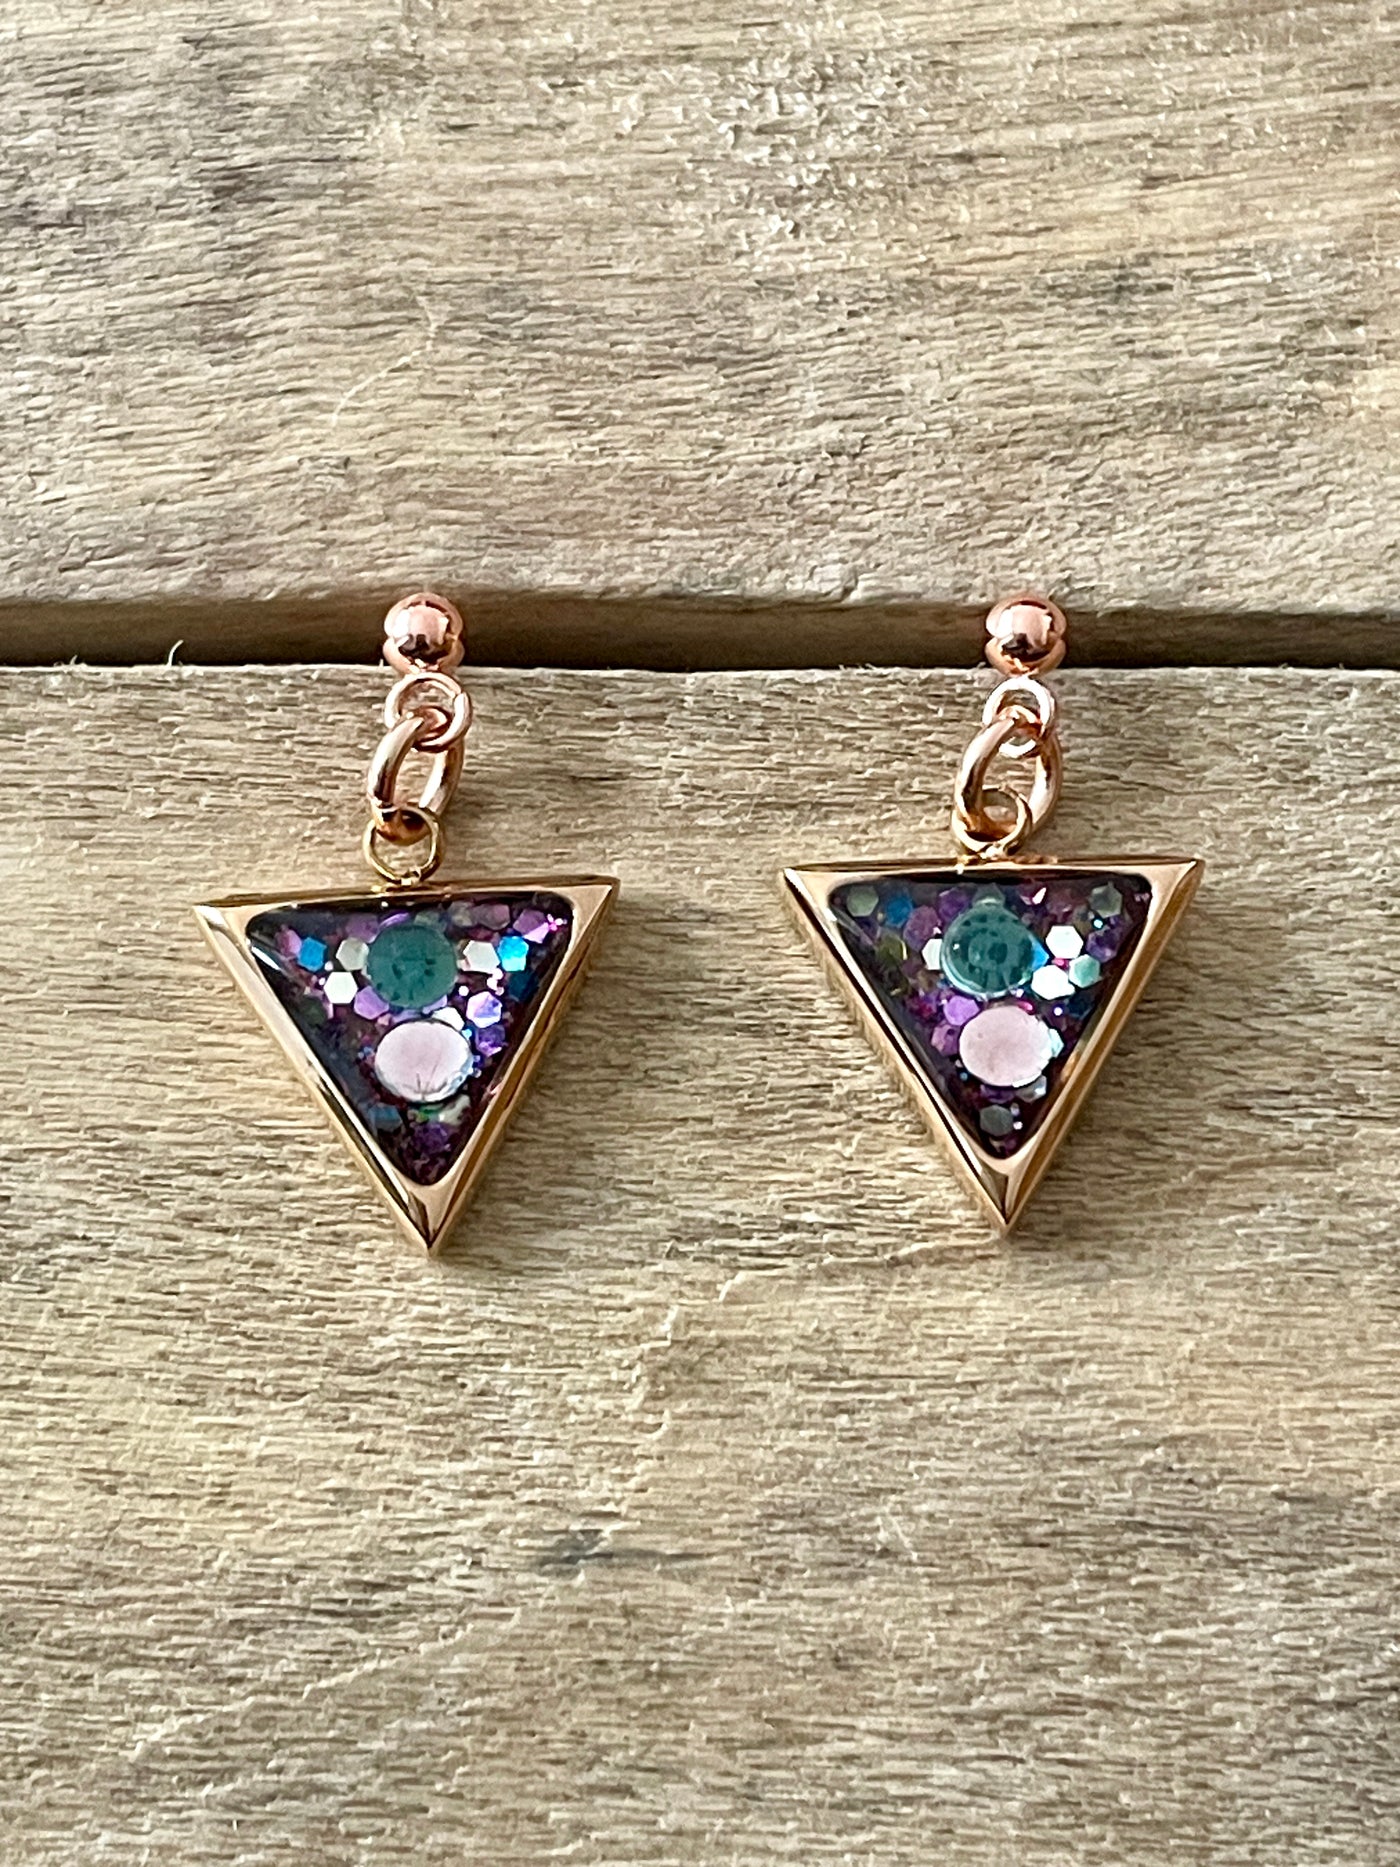 Boucles d'oreilles Or rose Triangle Canalisation et intuition